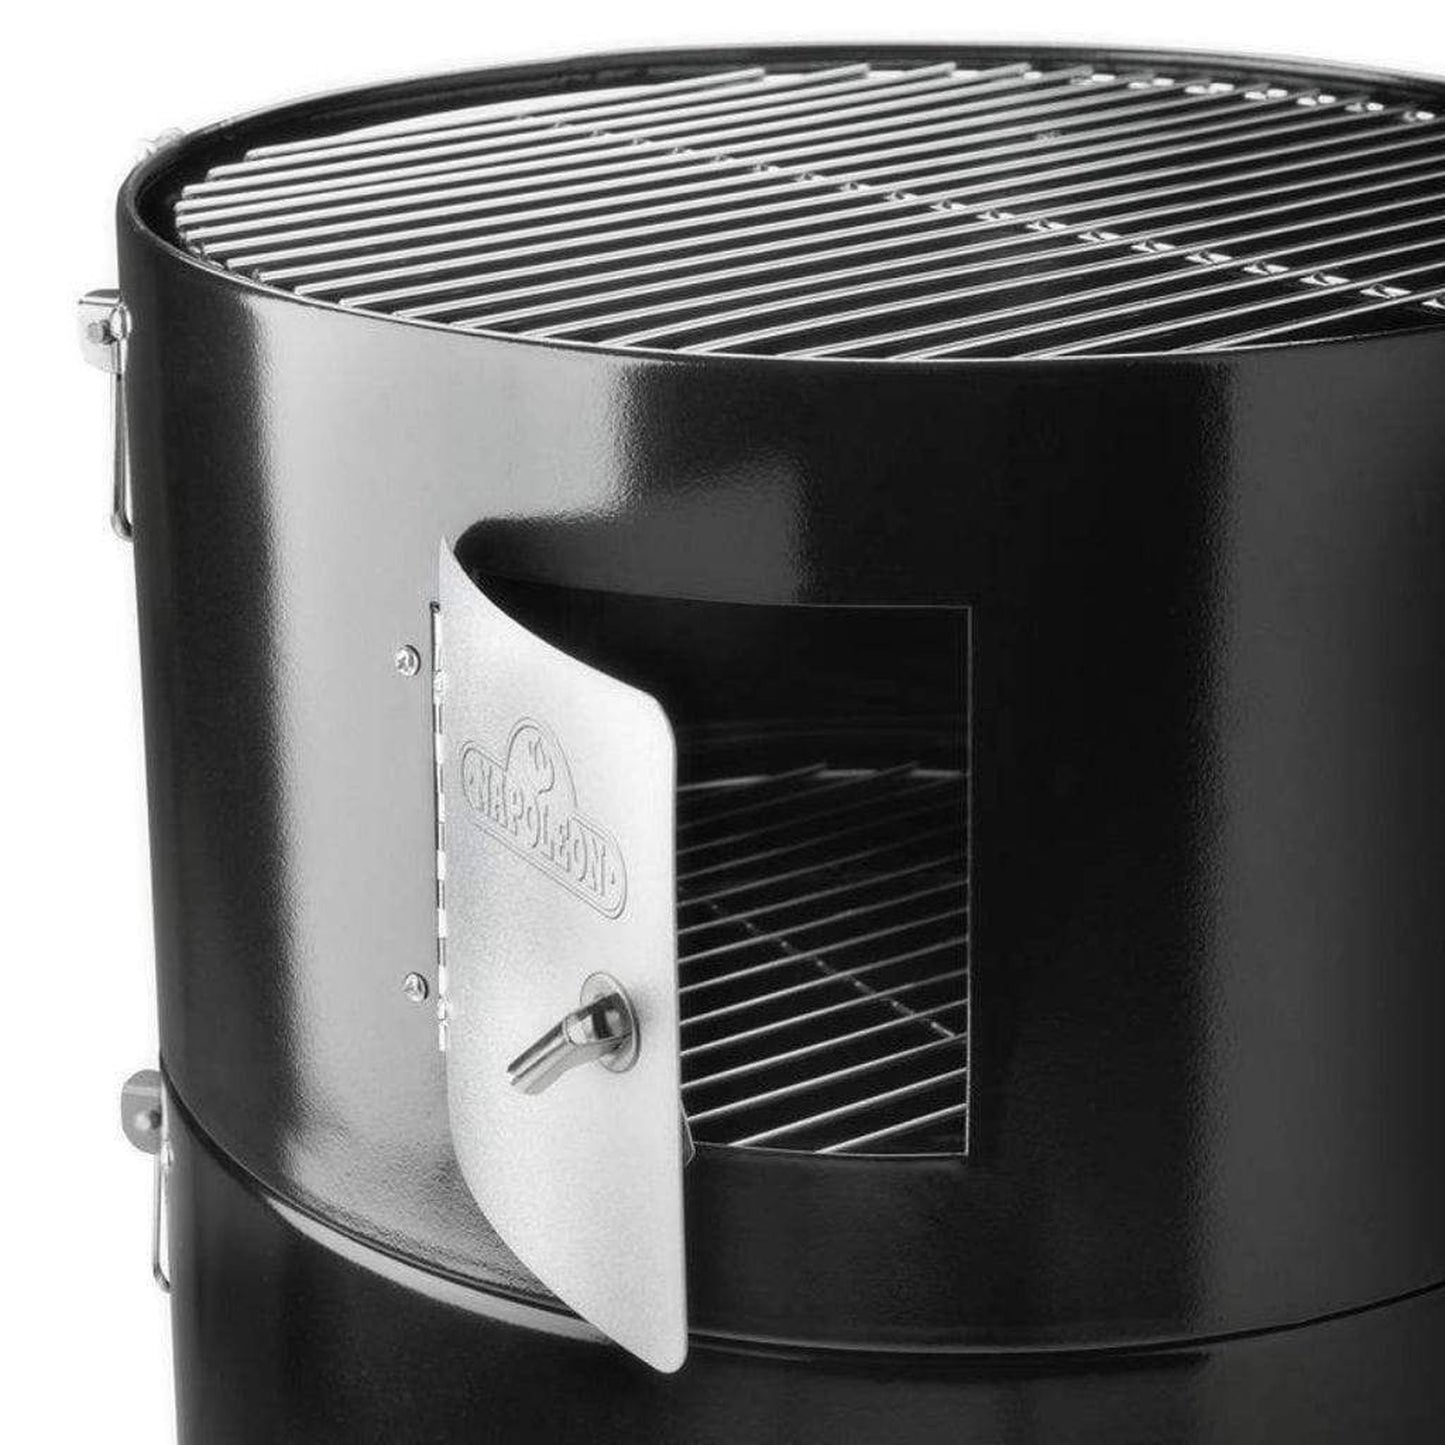 Napoleon 16" Apollo 200 Charcoal Grill (3 in 1 Smoker and Grill)